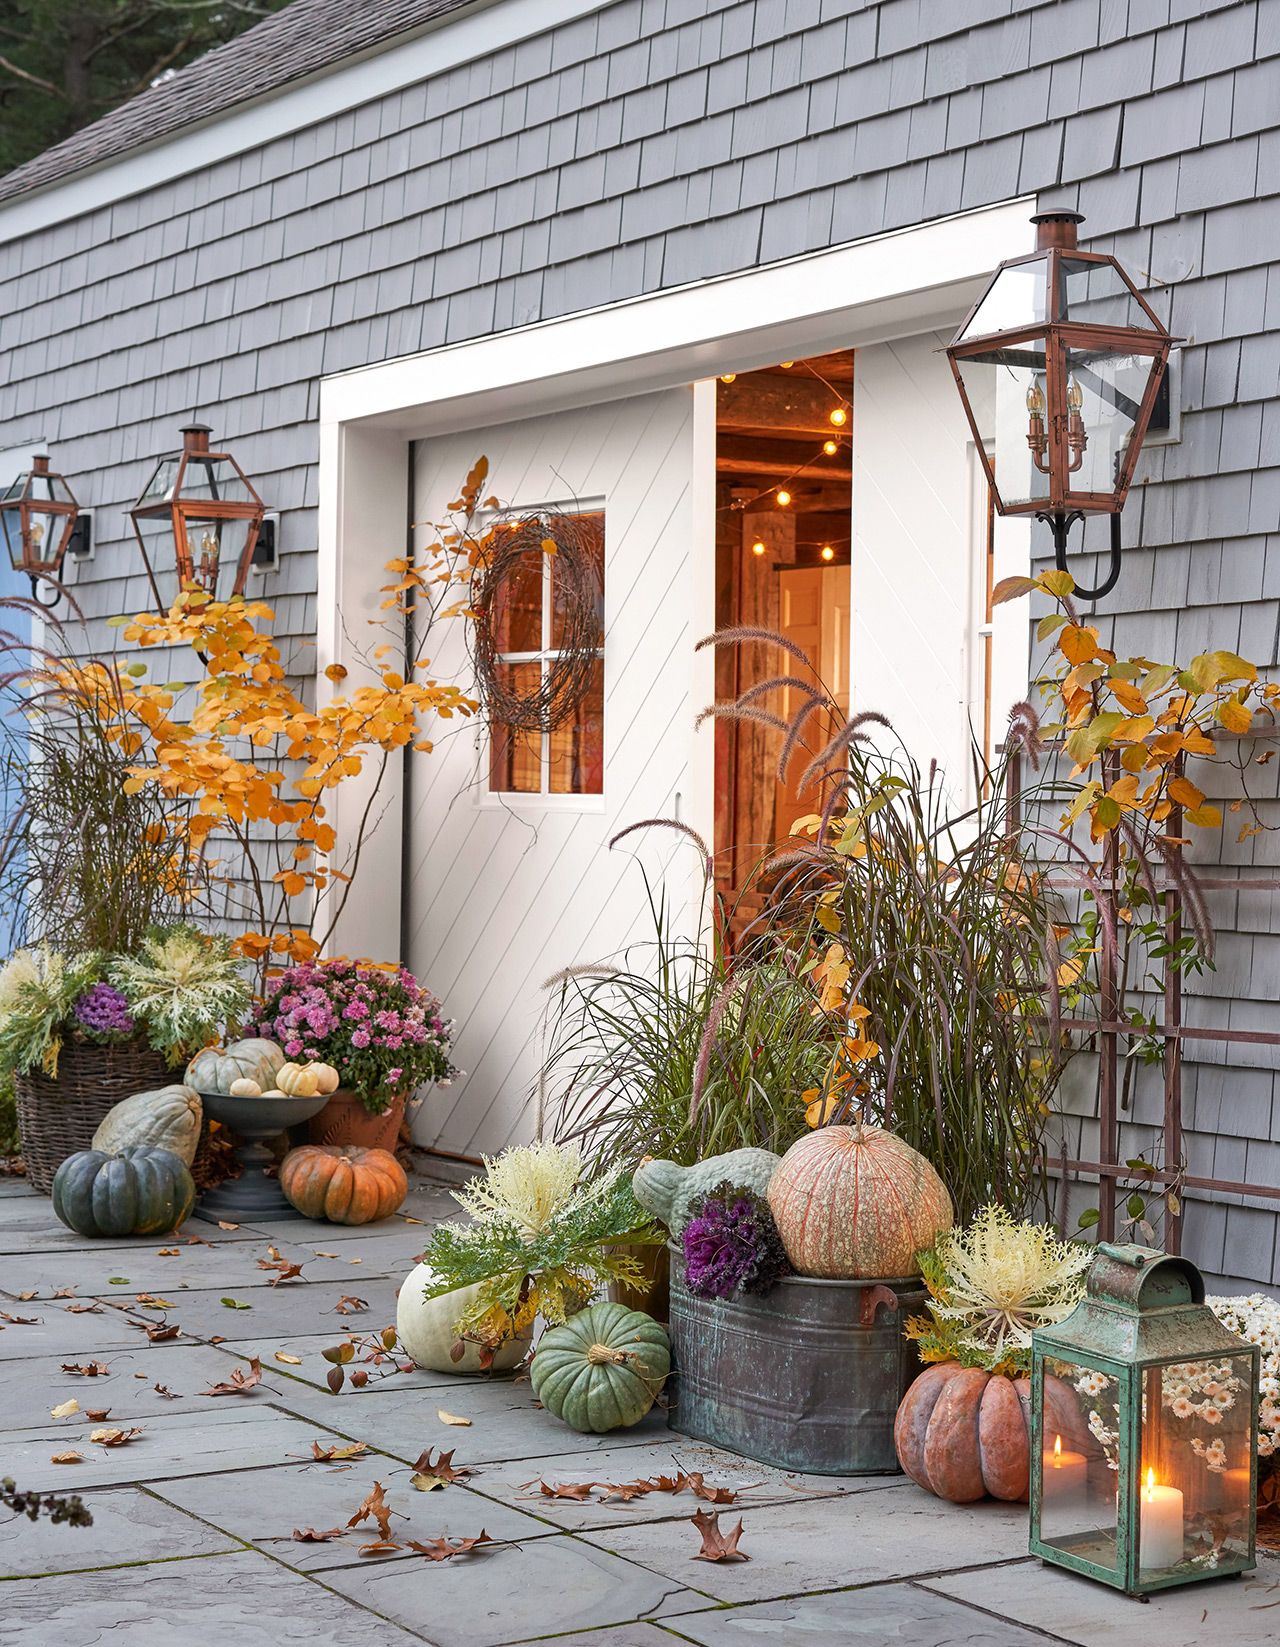 Harvest Decorating Ideas Featuring on The Fall Porch